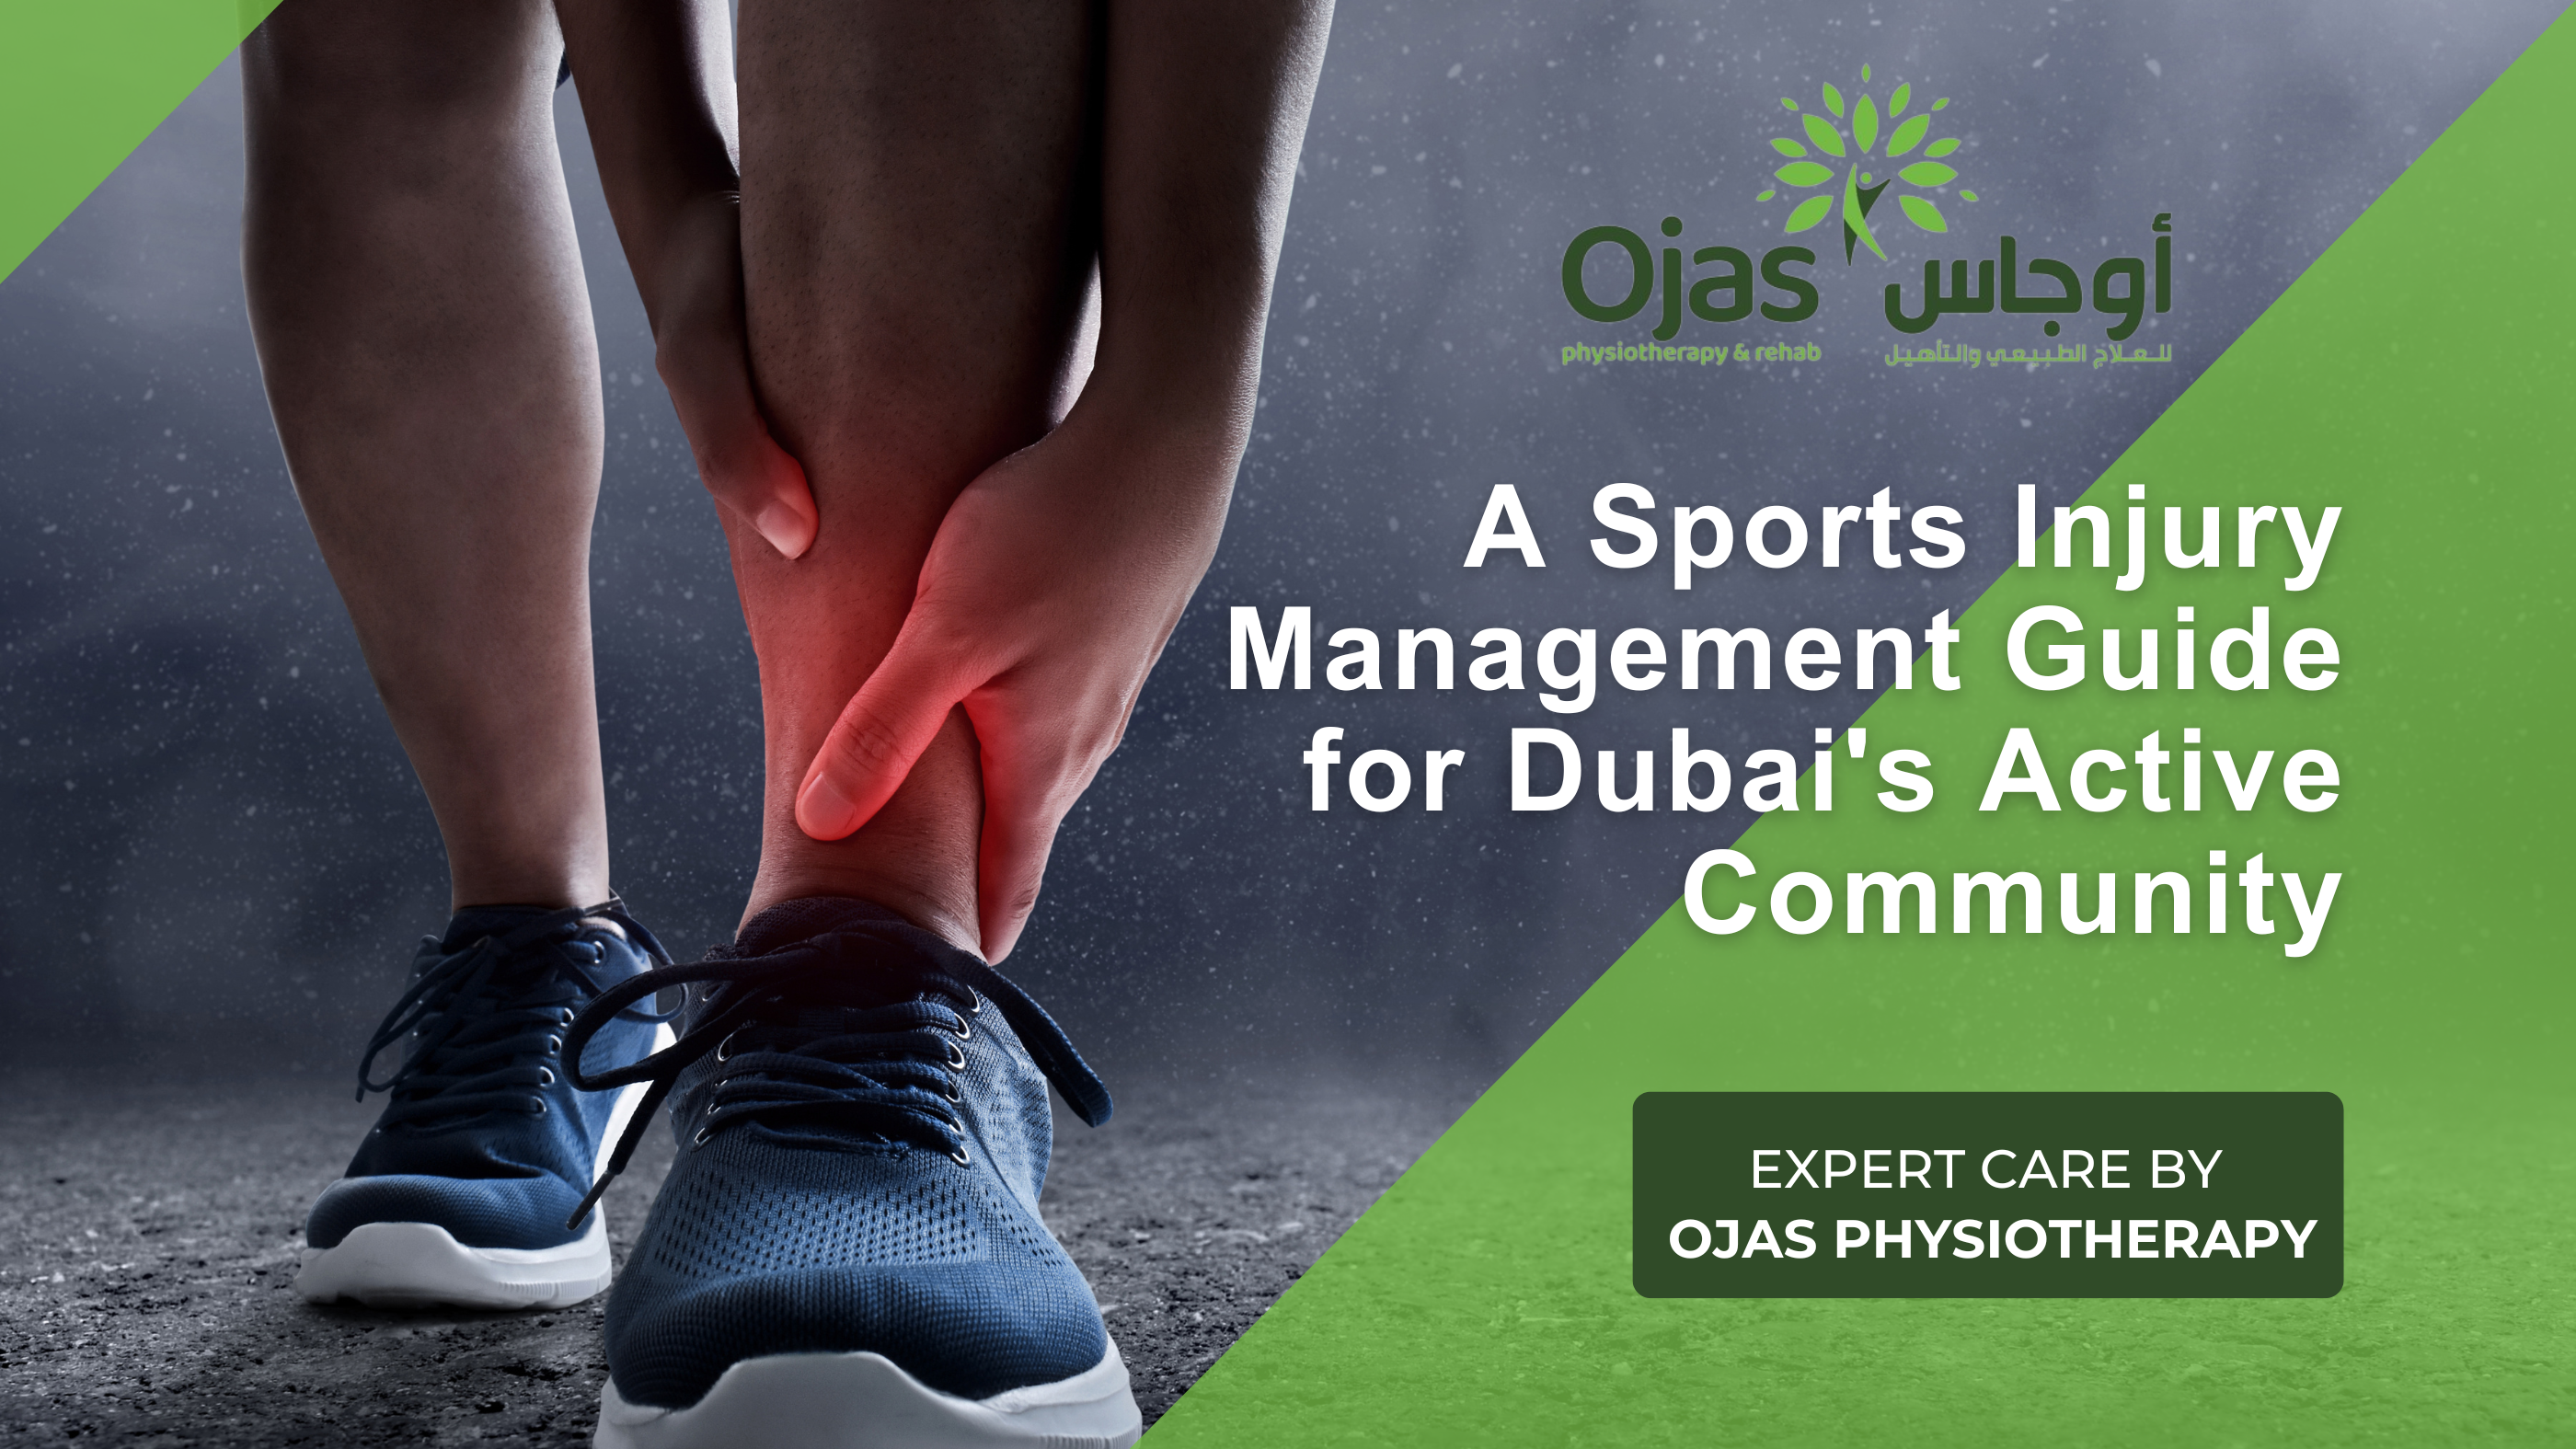 CONQUER EVERY CHALLENGE: A SPORTS INJURY MANAGEMENT GUIDE FOR DUBAI’S ACTIVE COMMUNITY